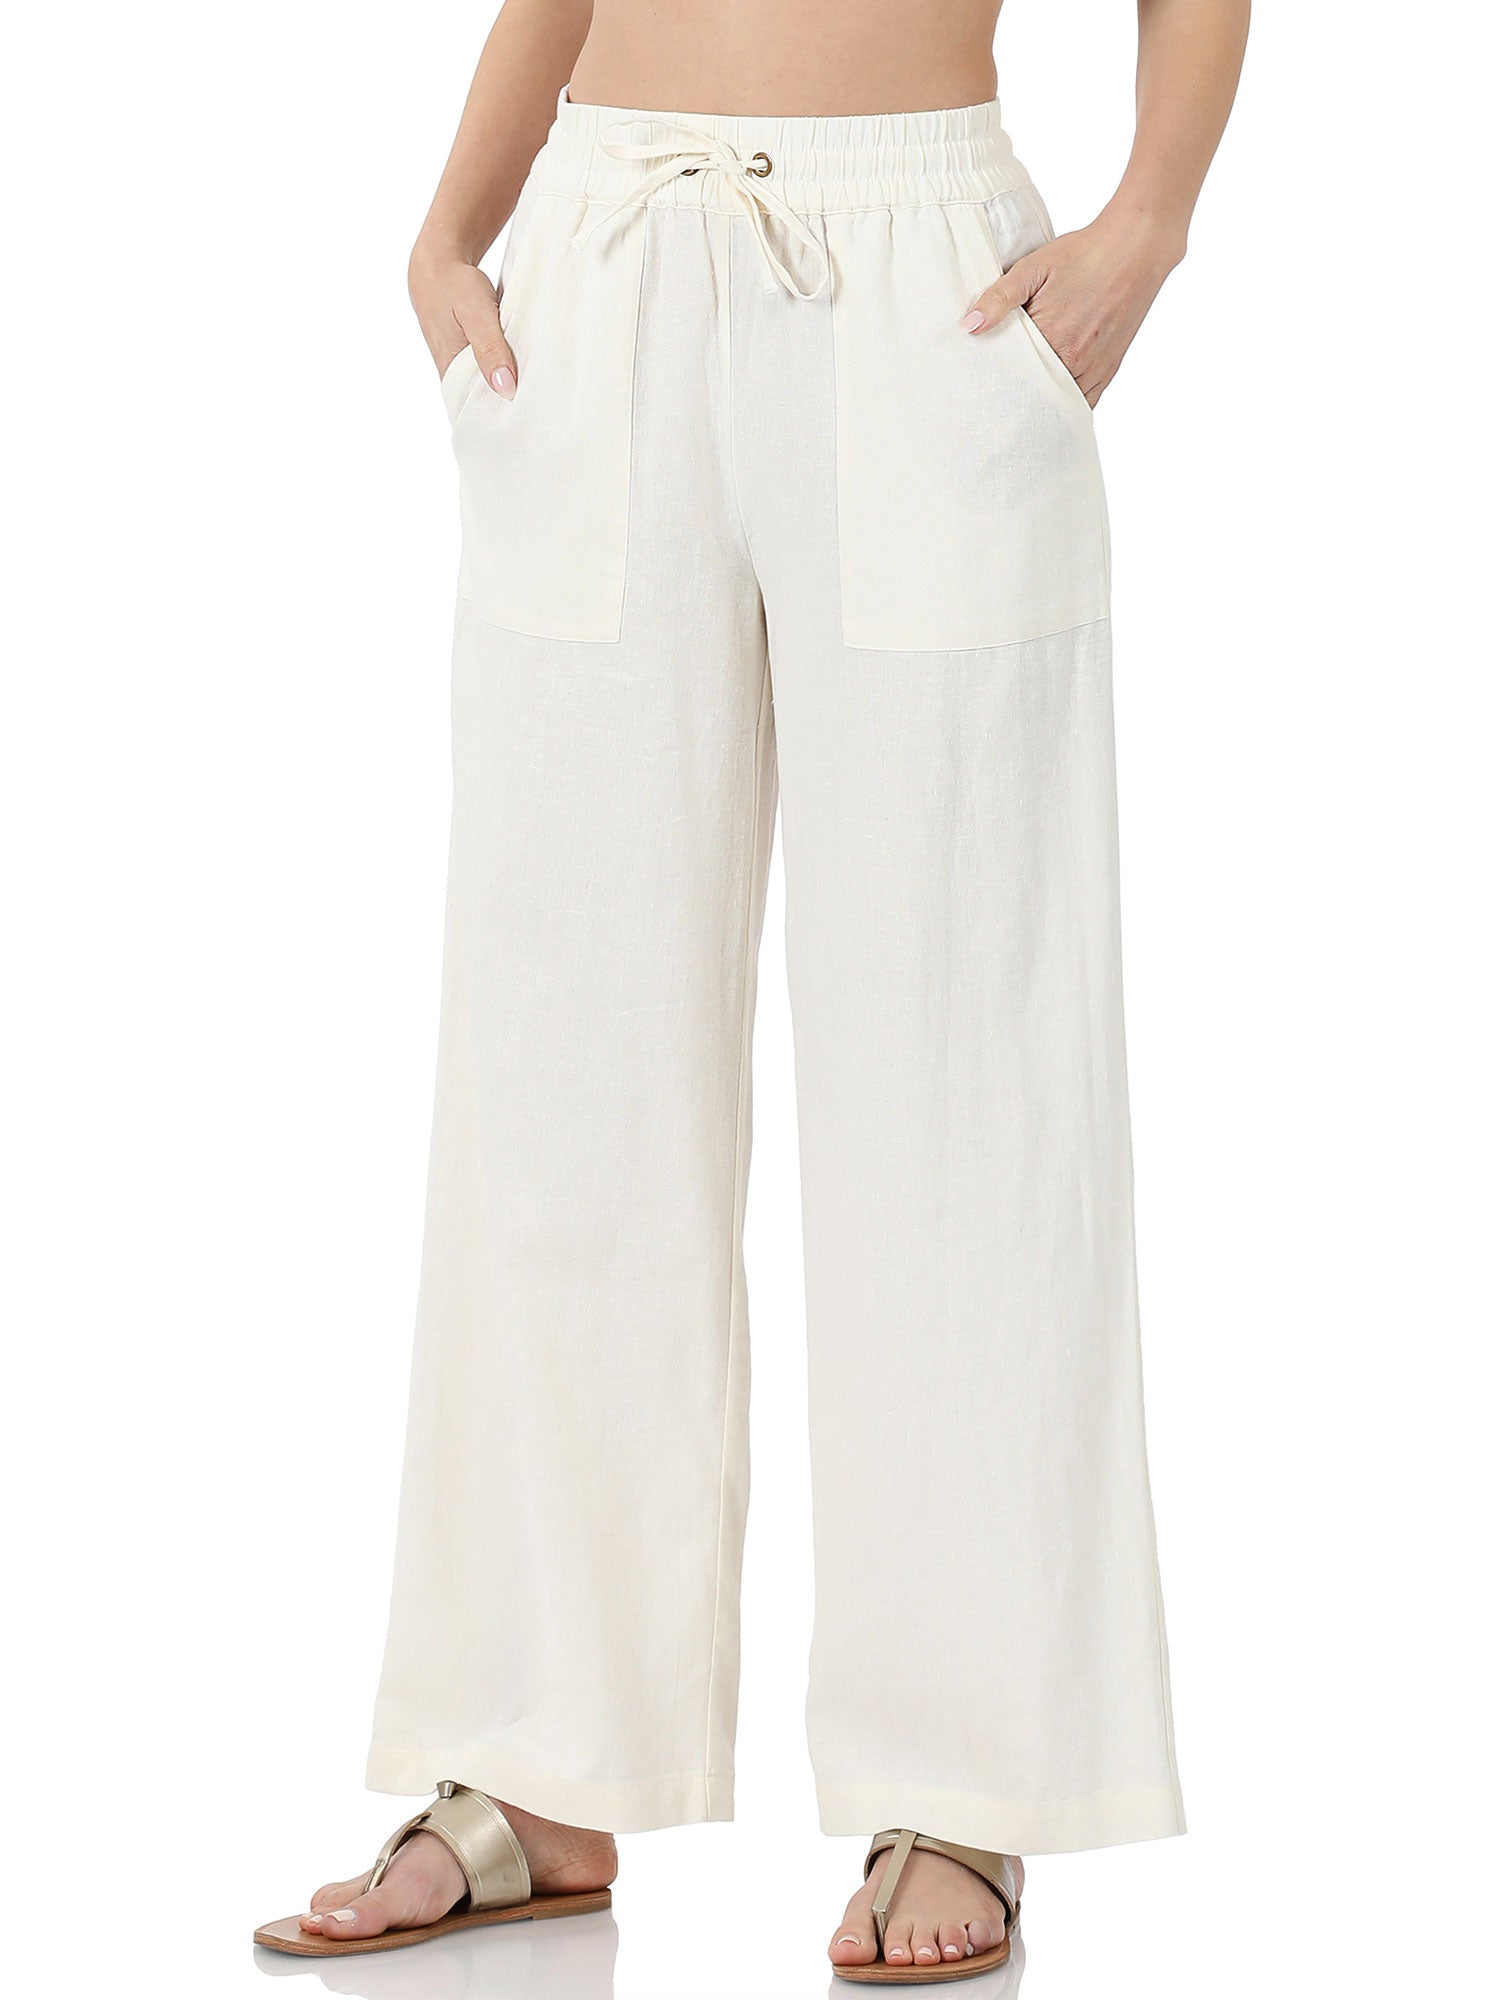 Womens Casual Linen Pants with Waist Drawstring and Side Pockets - KOGMO